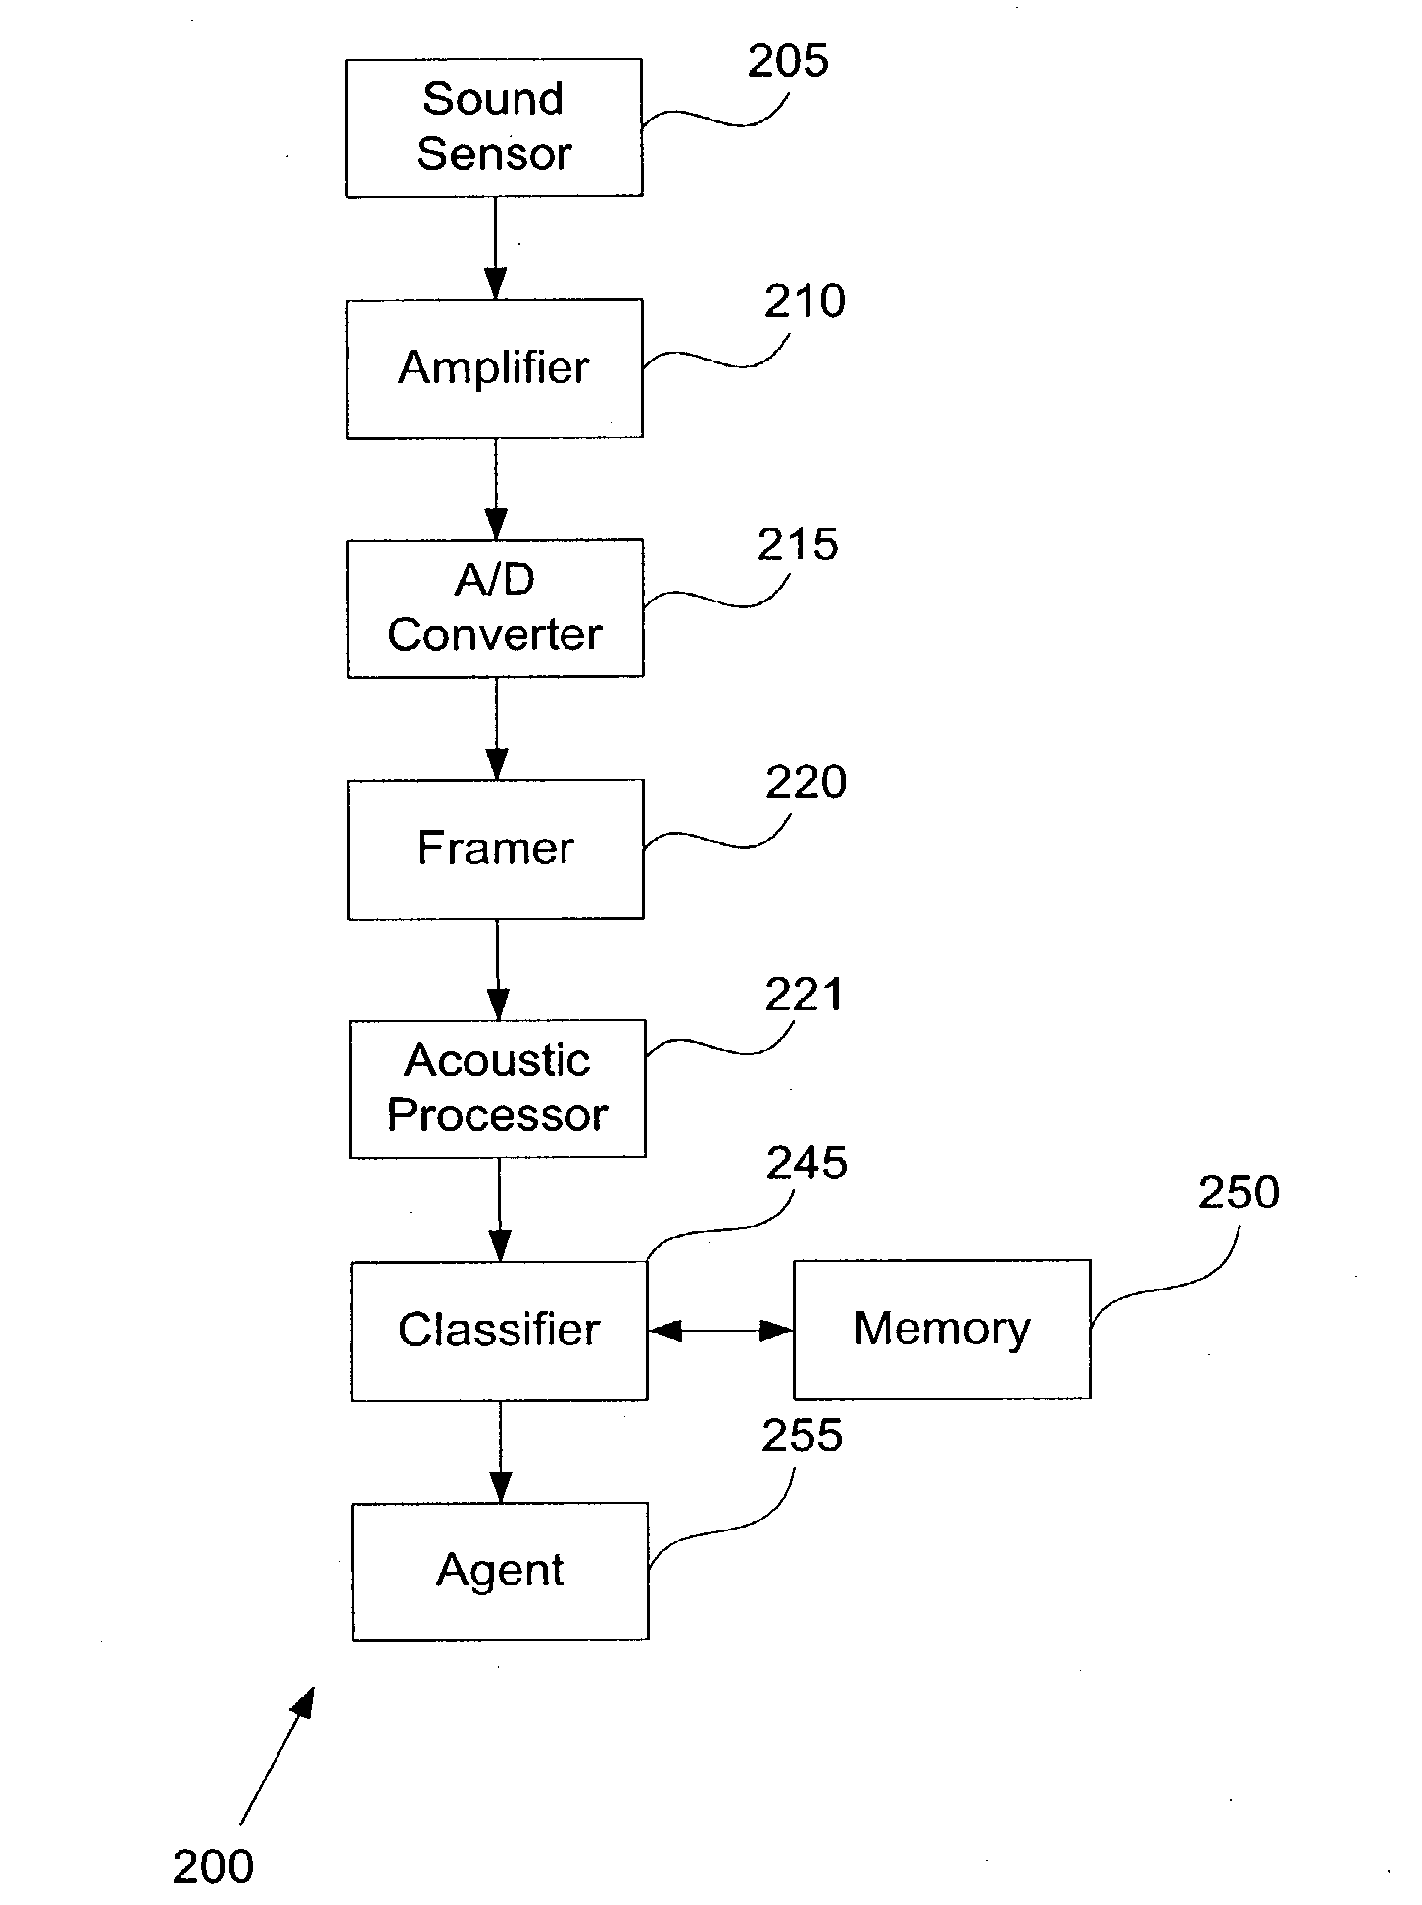 System for classification of voice signals